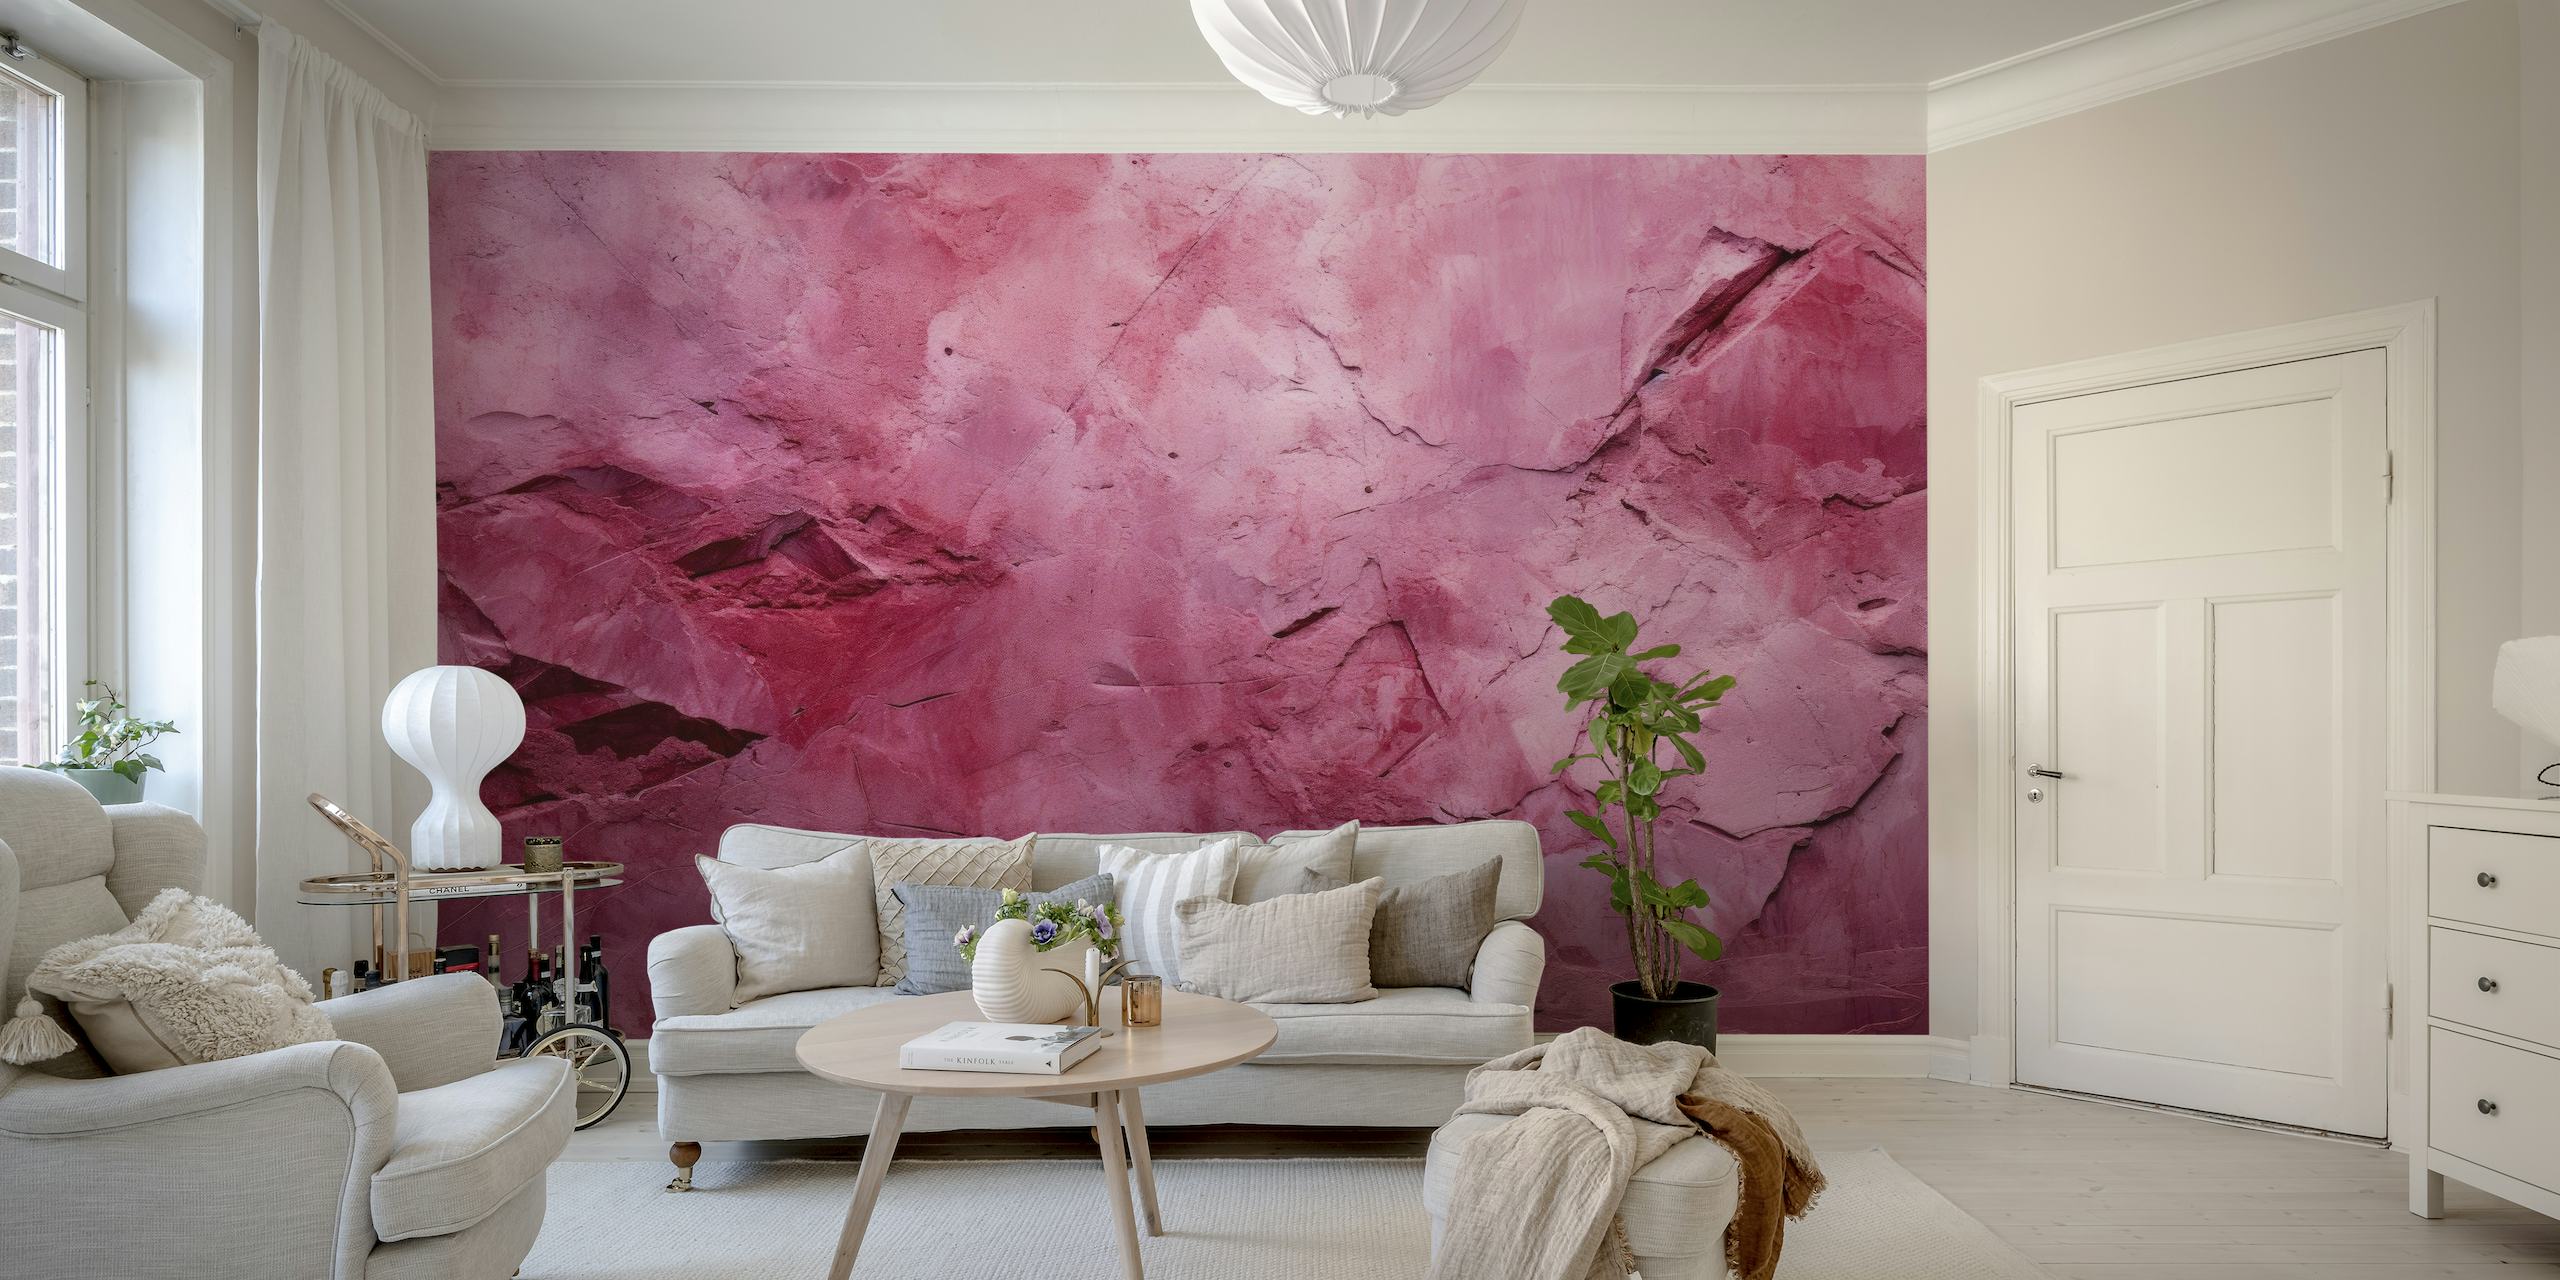 Pink Textured Wall Finish tapete